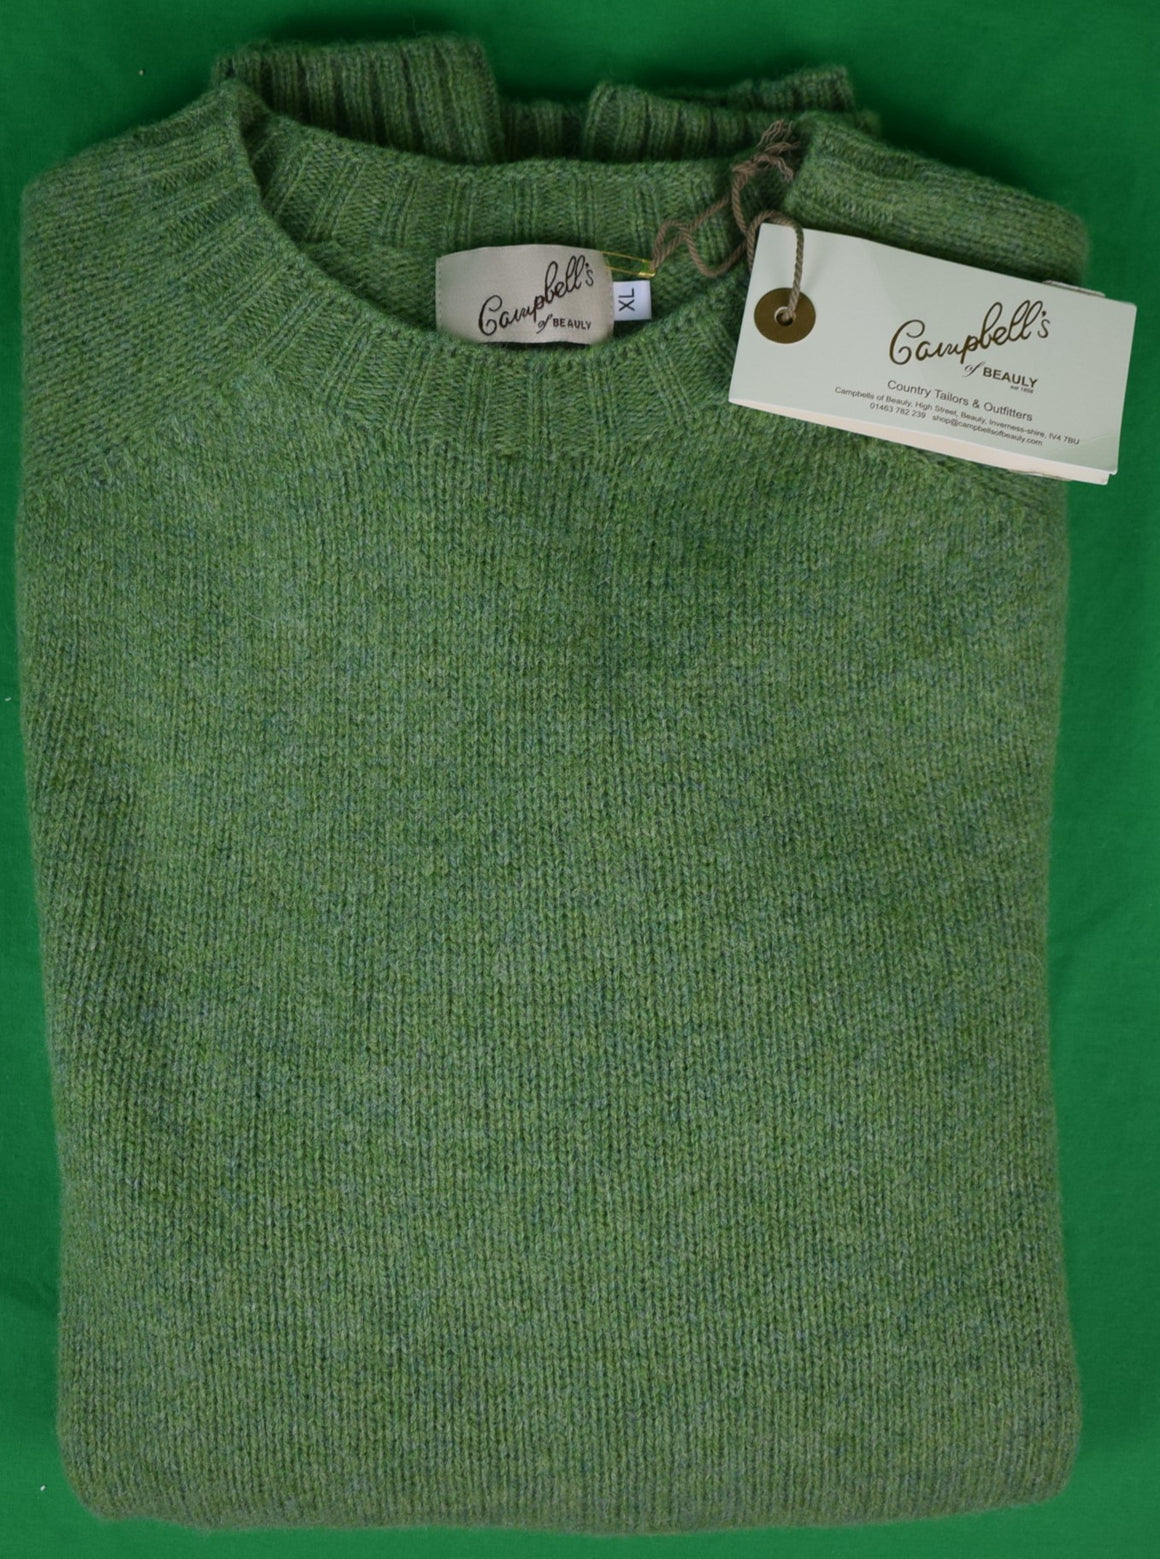 "Campbell's Of Beauly Scottish Shetland Apple Green Crewneck Sweater" Sz XL (NWT) (SOLD)